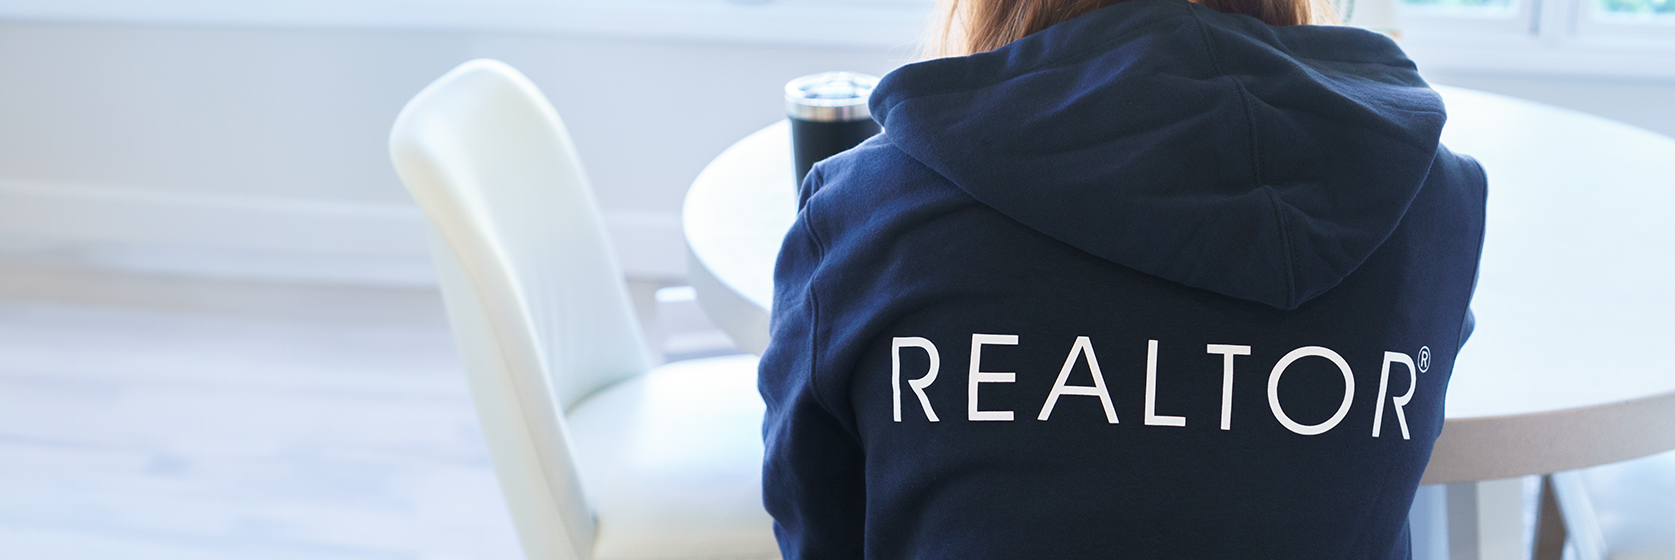 Image of Woman sitting at a kitchen table with her back to the camera, wearing a navy sweatshirt that has the "REALTOR®" printed on it. 